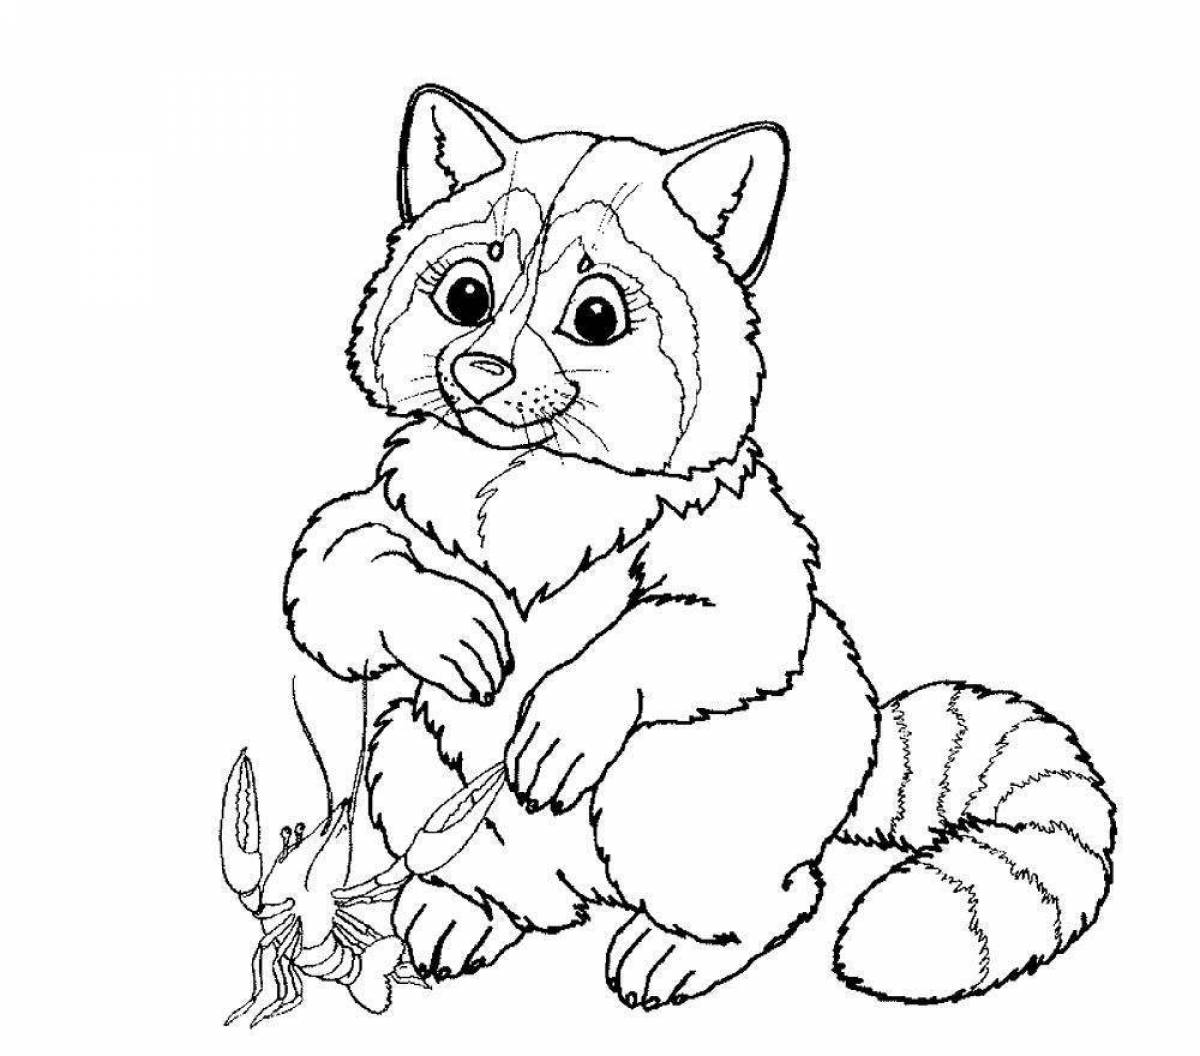 Color-frenzy animal coloring page for kids